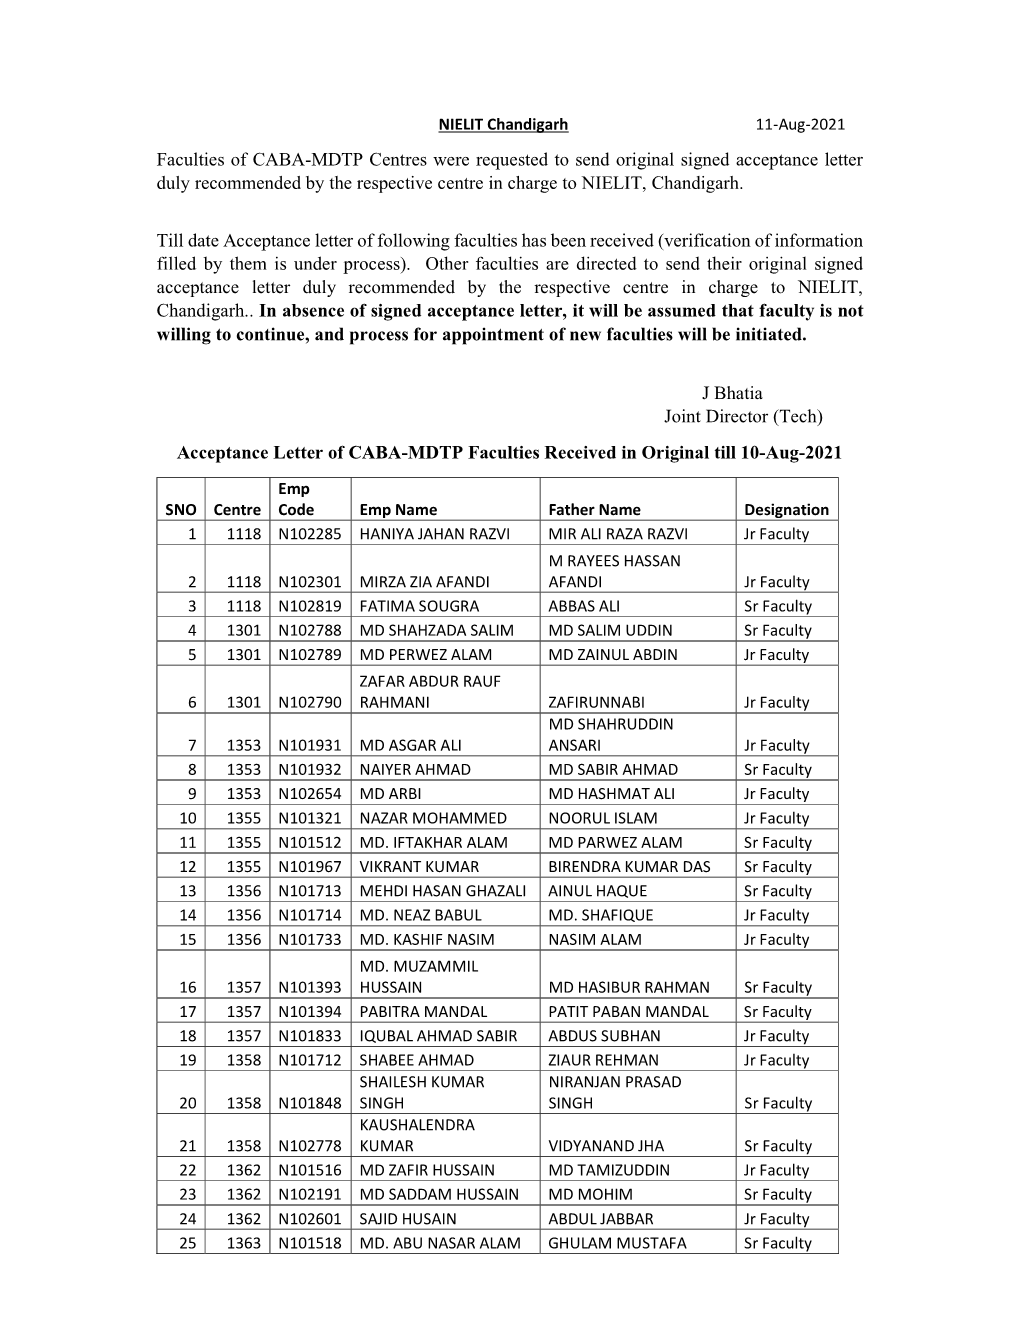 List of Faculties Whose Acceptance Letter Received Till 10-08